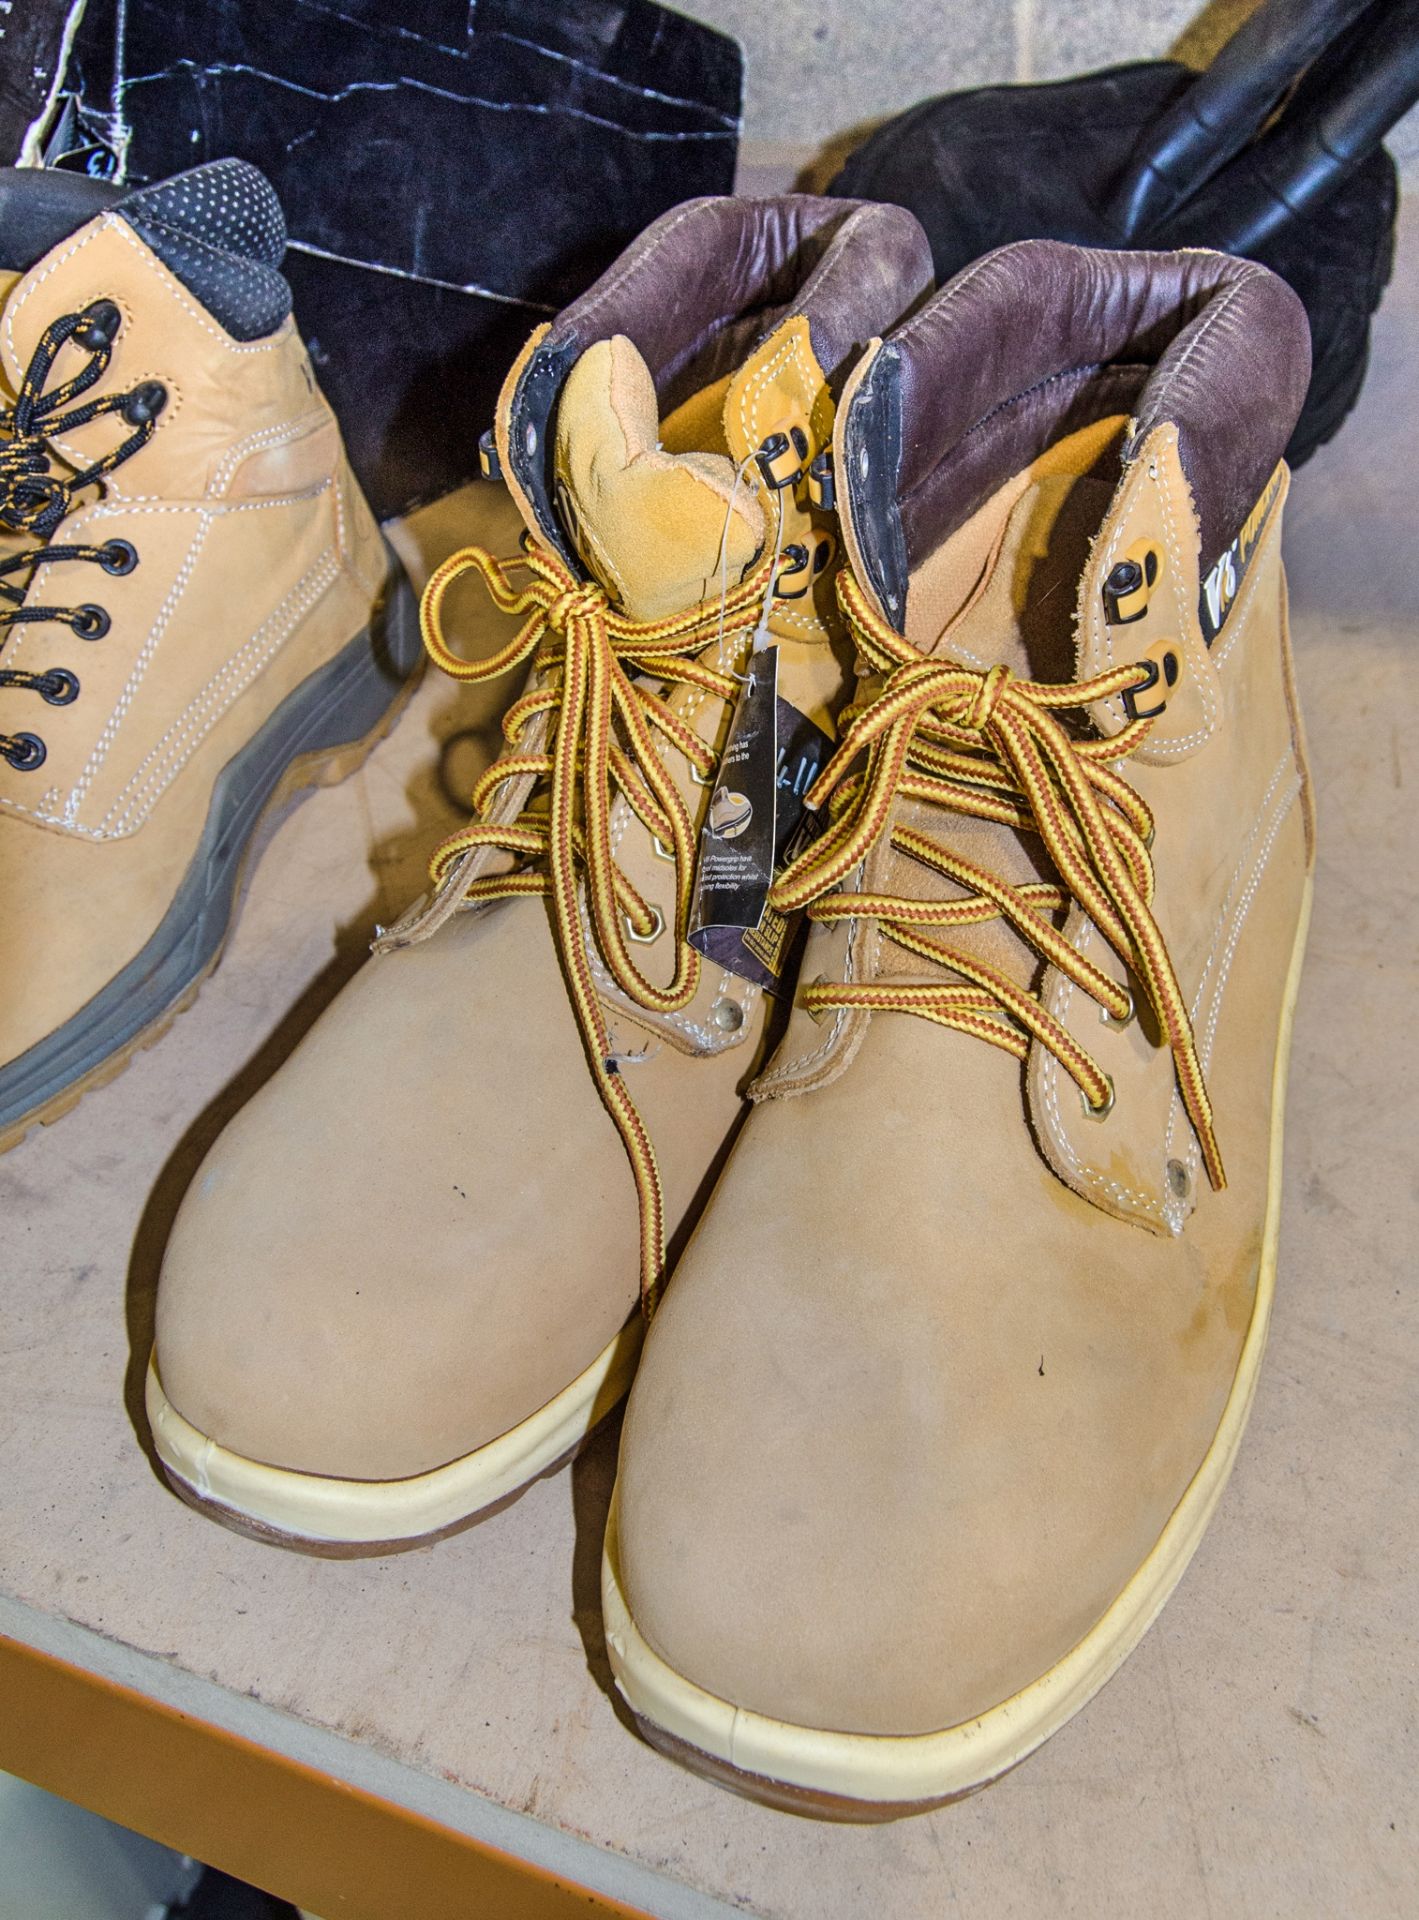 Pair of size 13 VR6 steel toe cap work boots